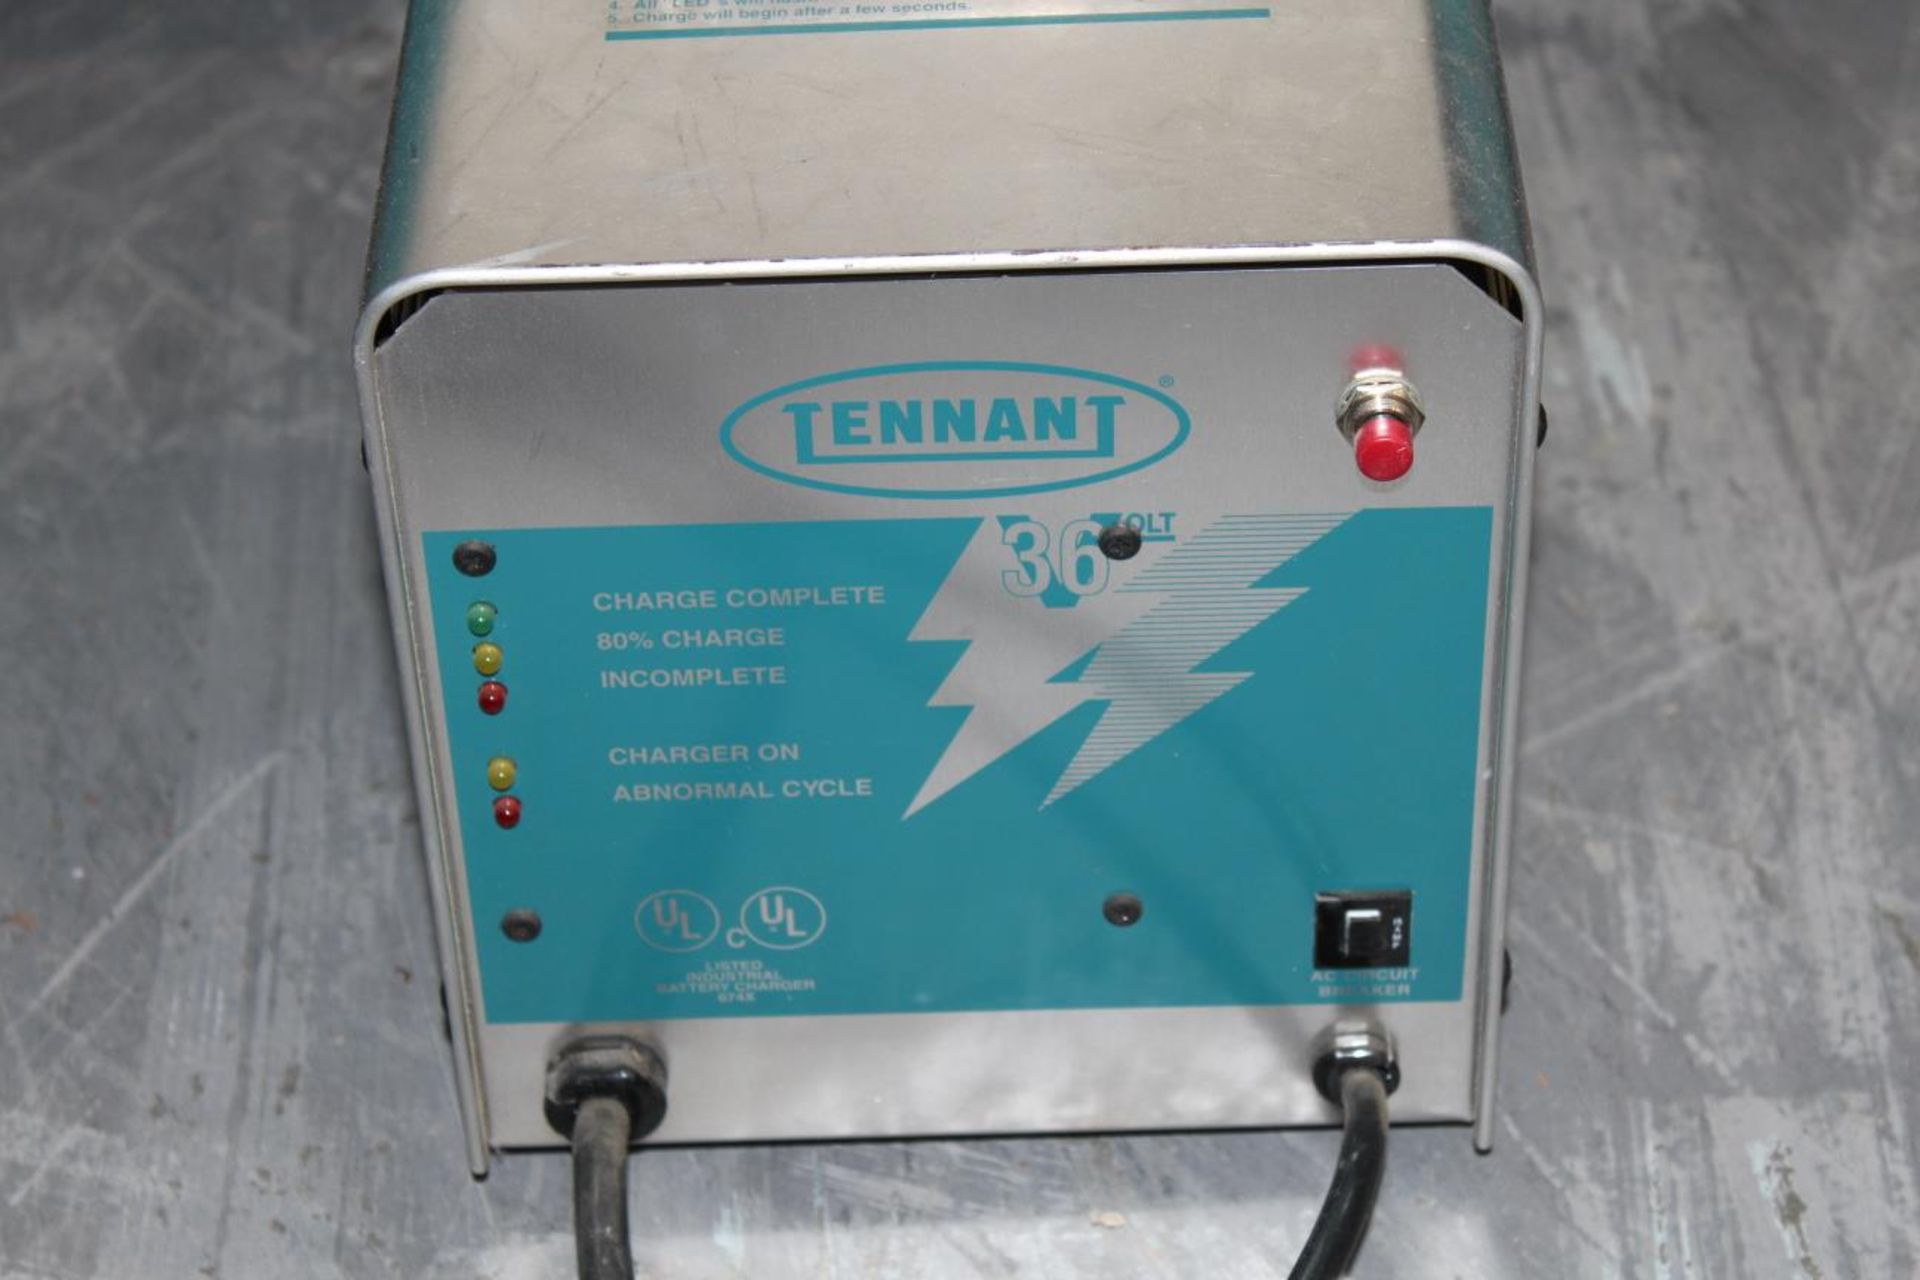 Tennant 6100 Electric Floor Sweeper (video) 36V, 1675lbs, 32" Wide, Tennant SCR362017 Charger 36v/ - Image 5 of 6